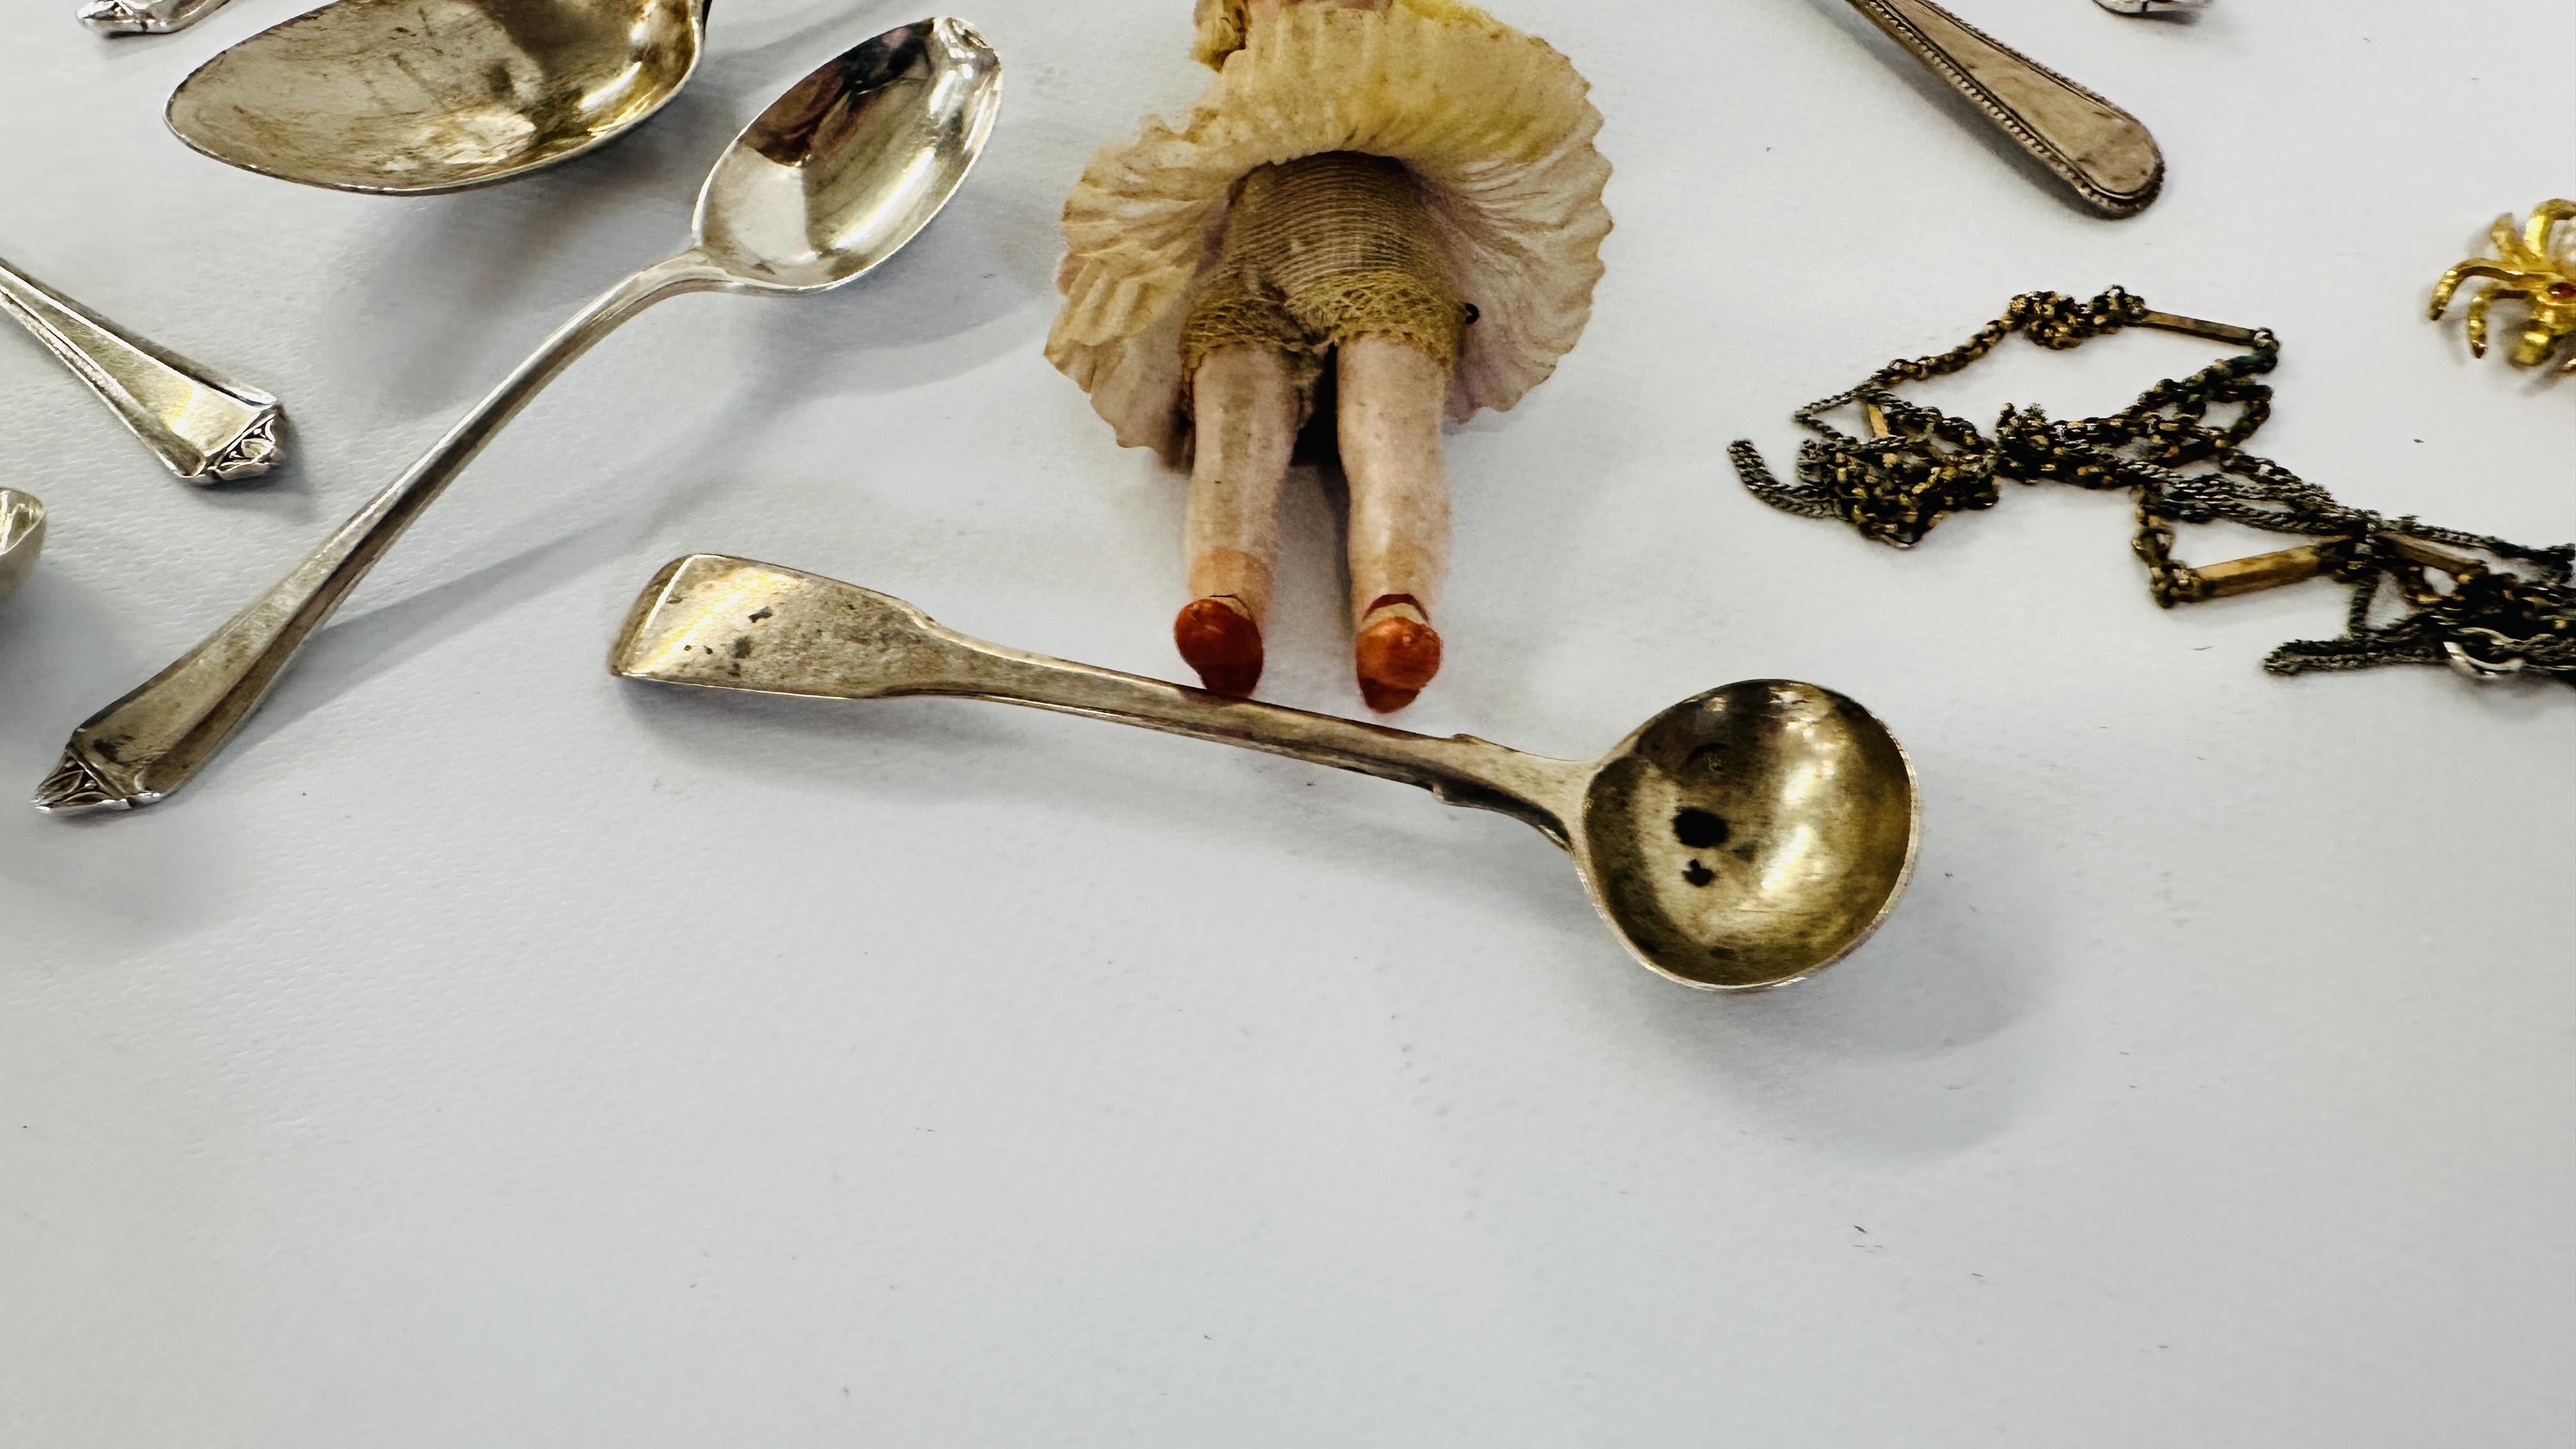 A GROUP OF 8 ASSORTED SILVER SPOONS, GILT SPIDER BROOCH ETC. AND A VINTAGE BISQUE MINIATURE DOLL. - Image 4 of 8